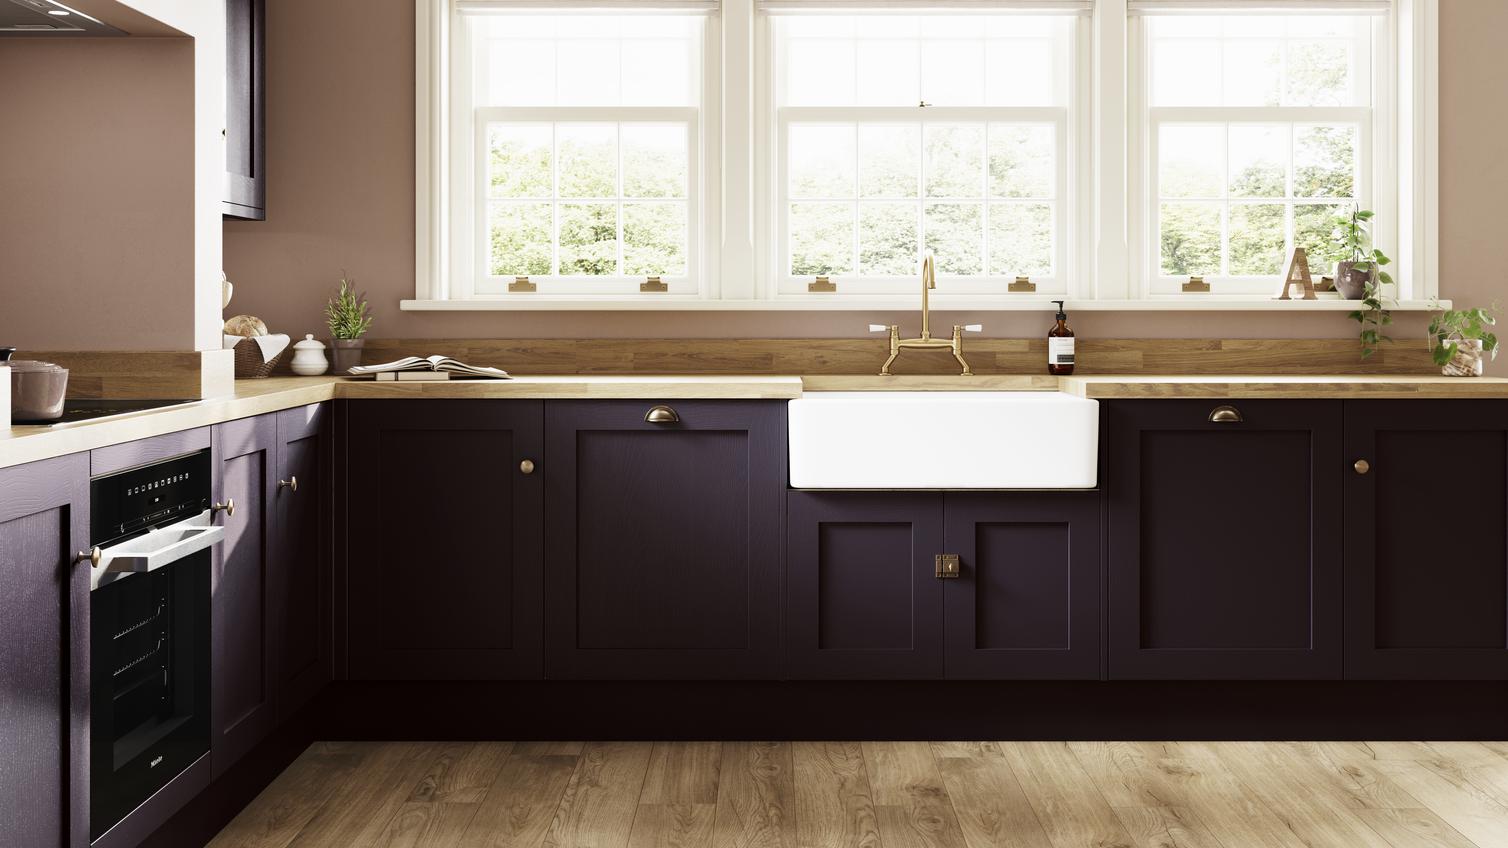 A purple-toned blackberry kitchen in an l-shaped layout. It features oak-effect worktops and brass cabinet accessories.